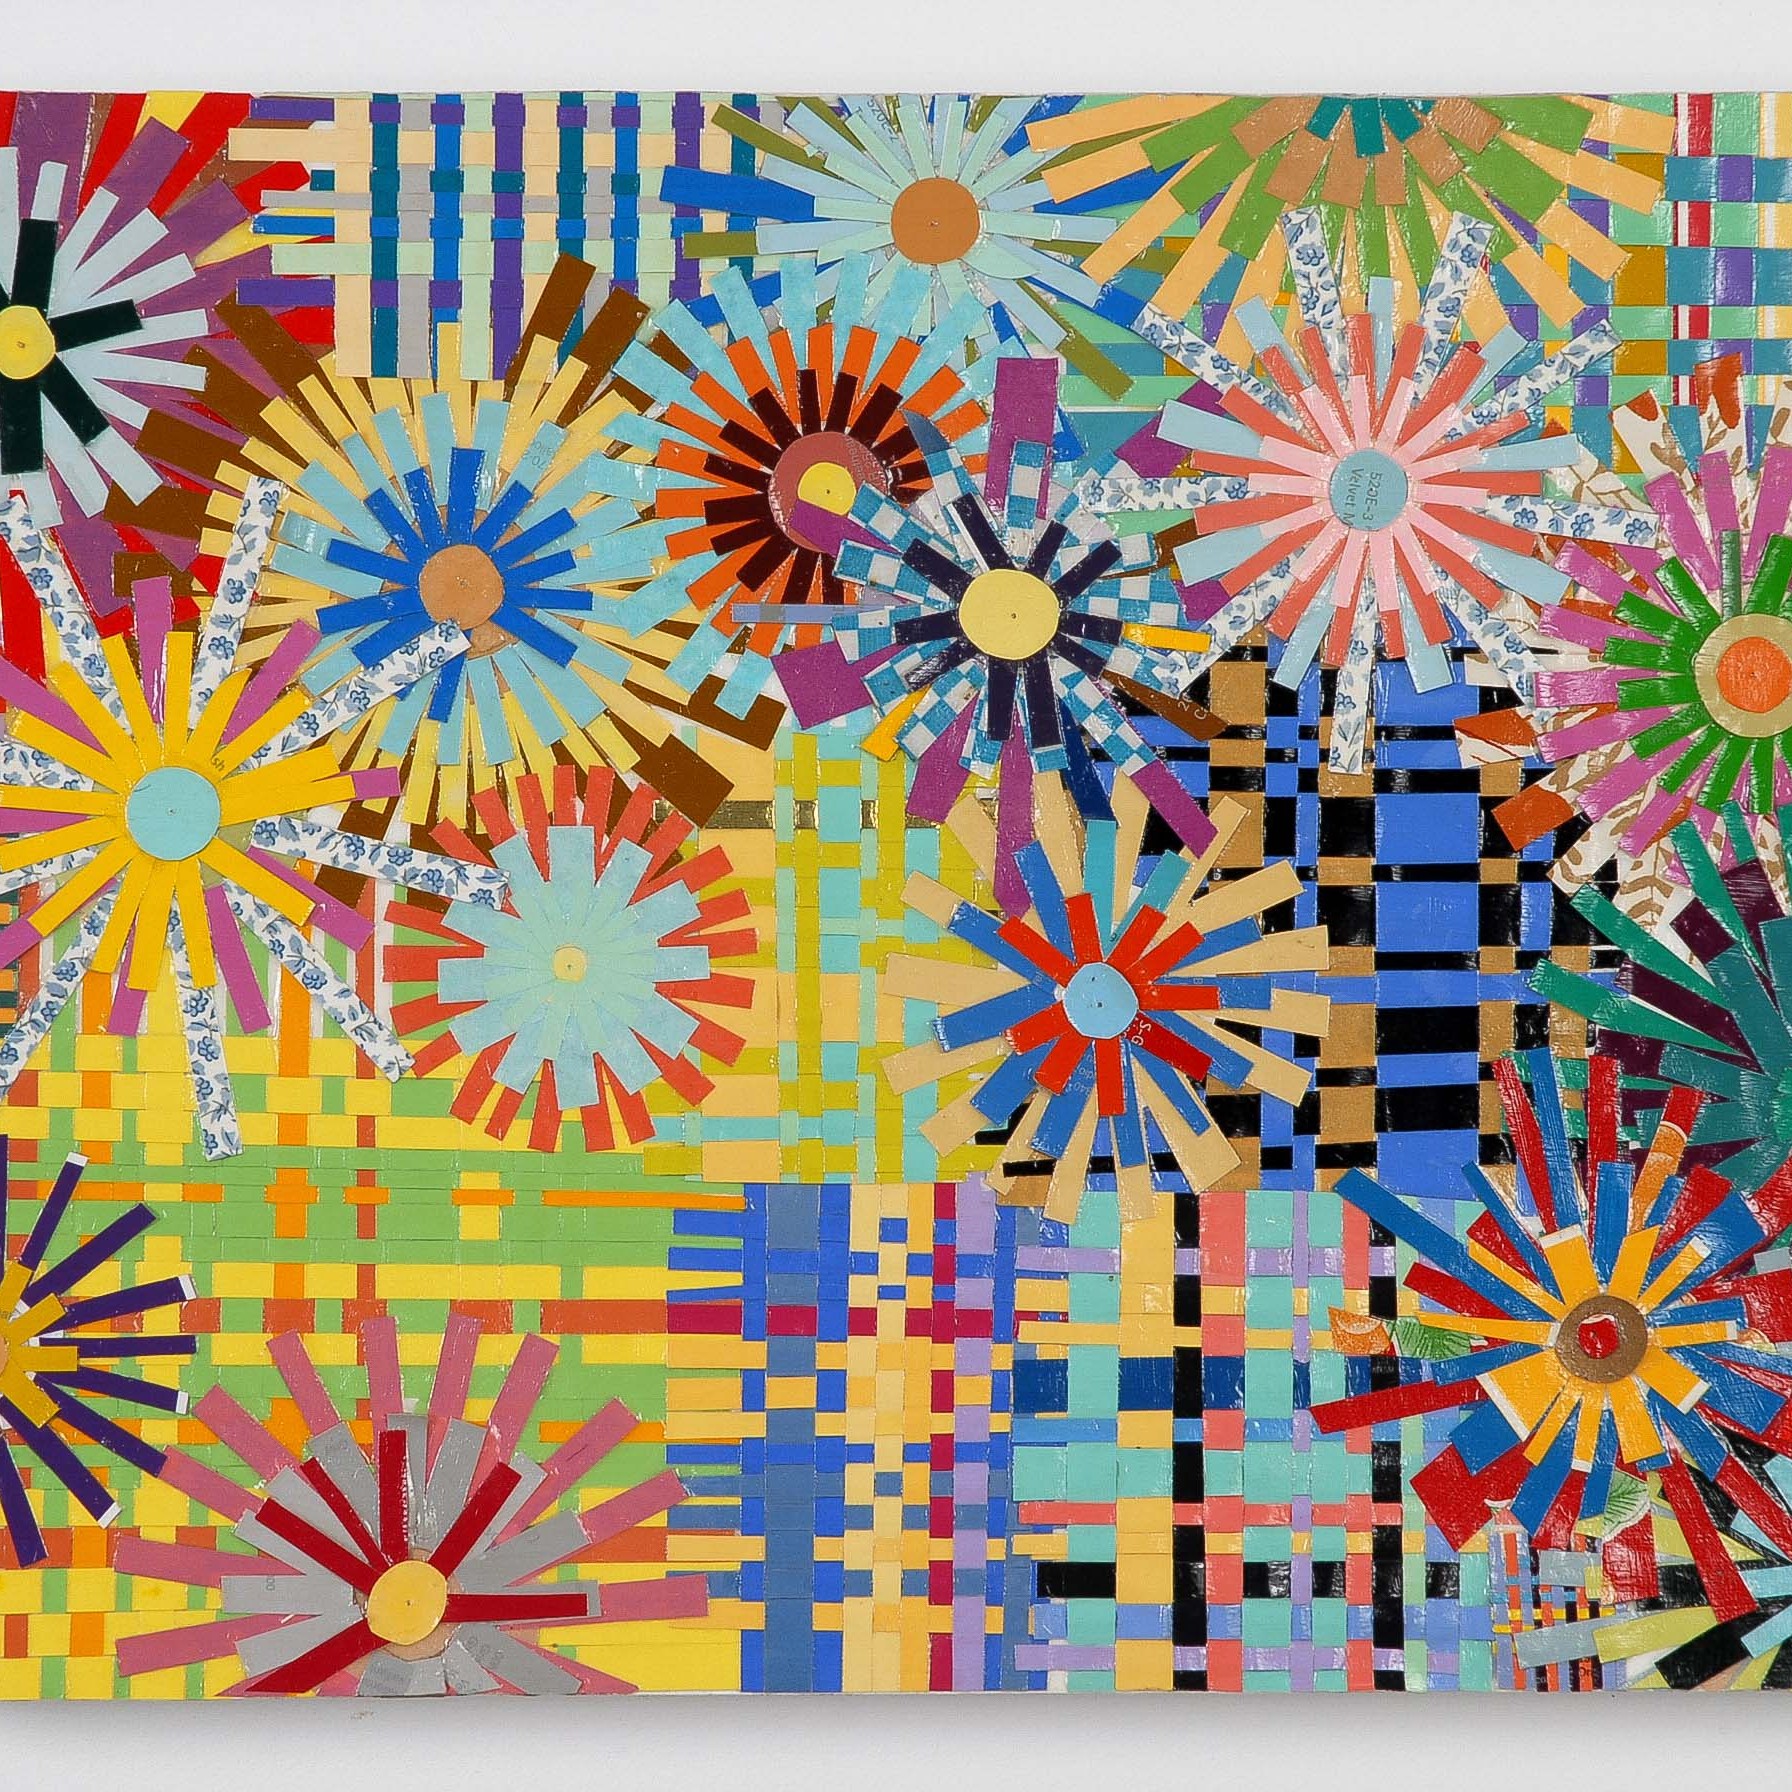 Patchwork - 2008 | Found paper on acrylic on wood | 16 x 20 in